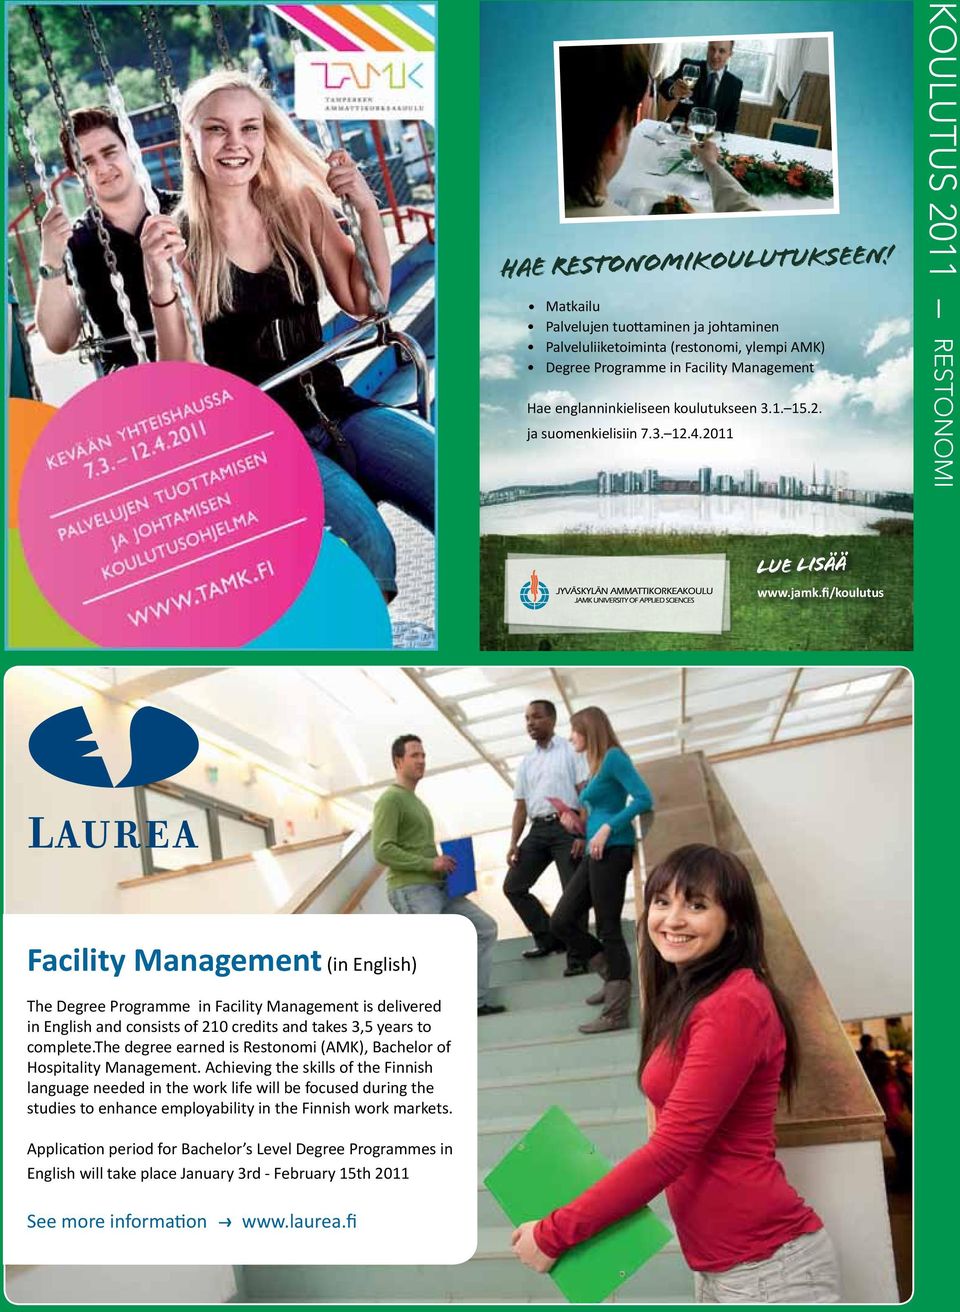 fi/koulutus Facility Management (in English) The Degree Programme in Facility Management is delivered in English and consists of 210 credits and takes 3,5 years to complete.